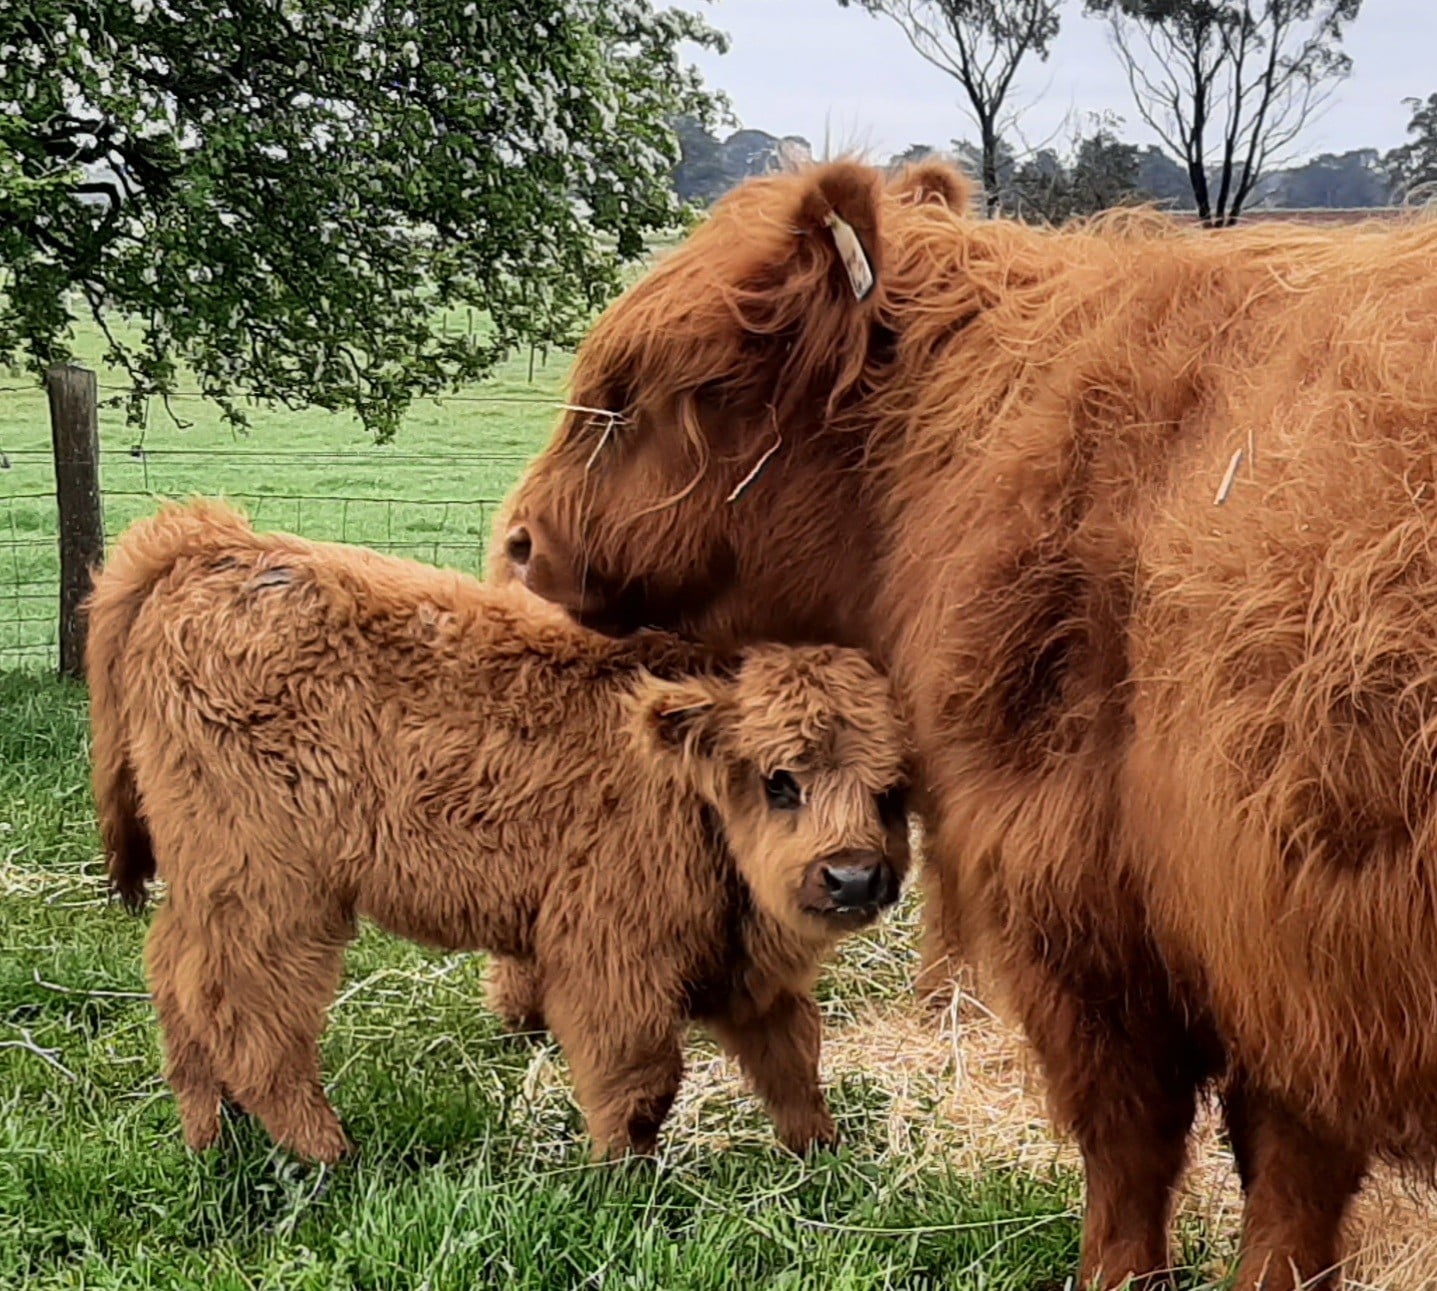 Poll Highland Cattle are Scottish Highland for Sale - Poll Highland